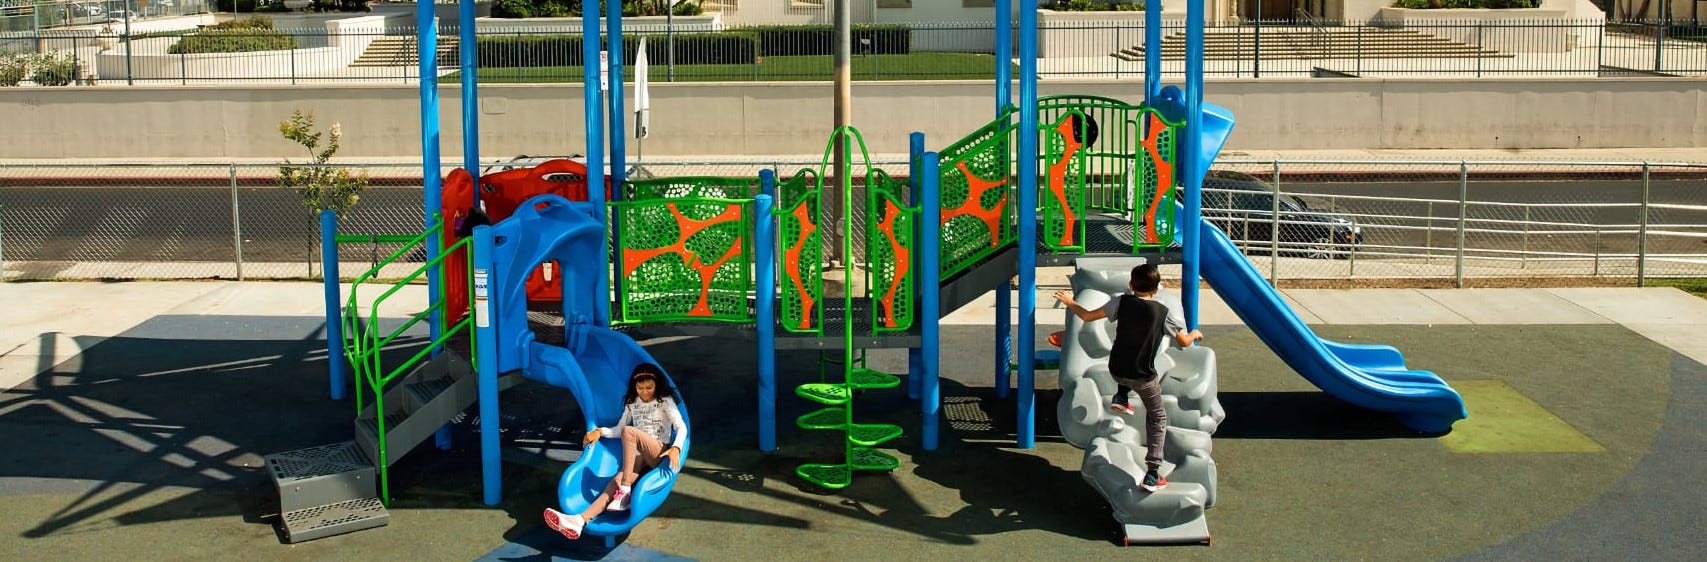 How to Overcome a Lack of Playground Funds (Ideas for Churches and Preschools)